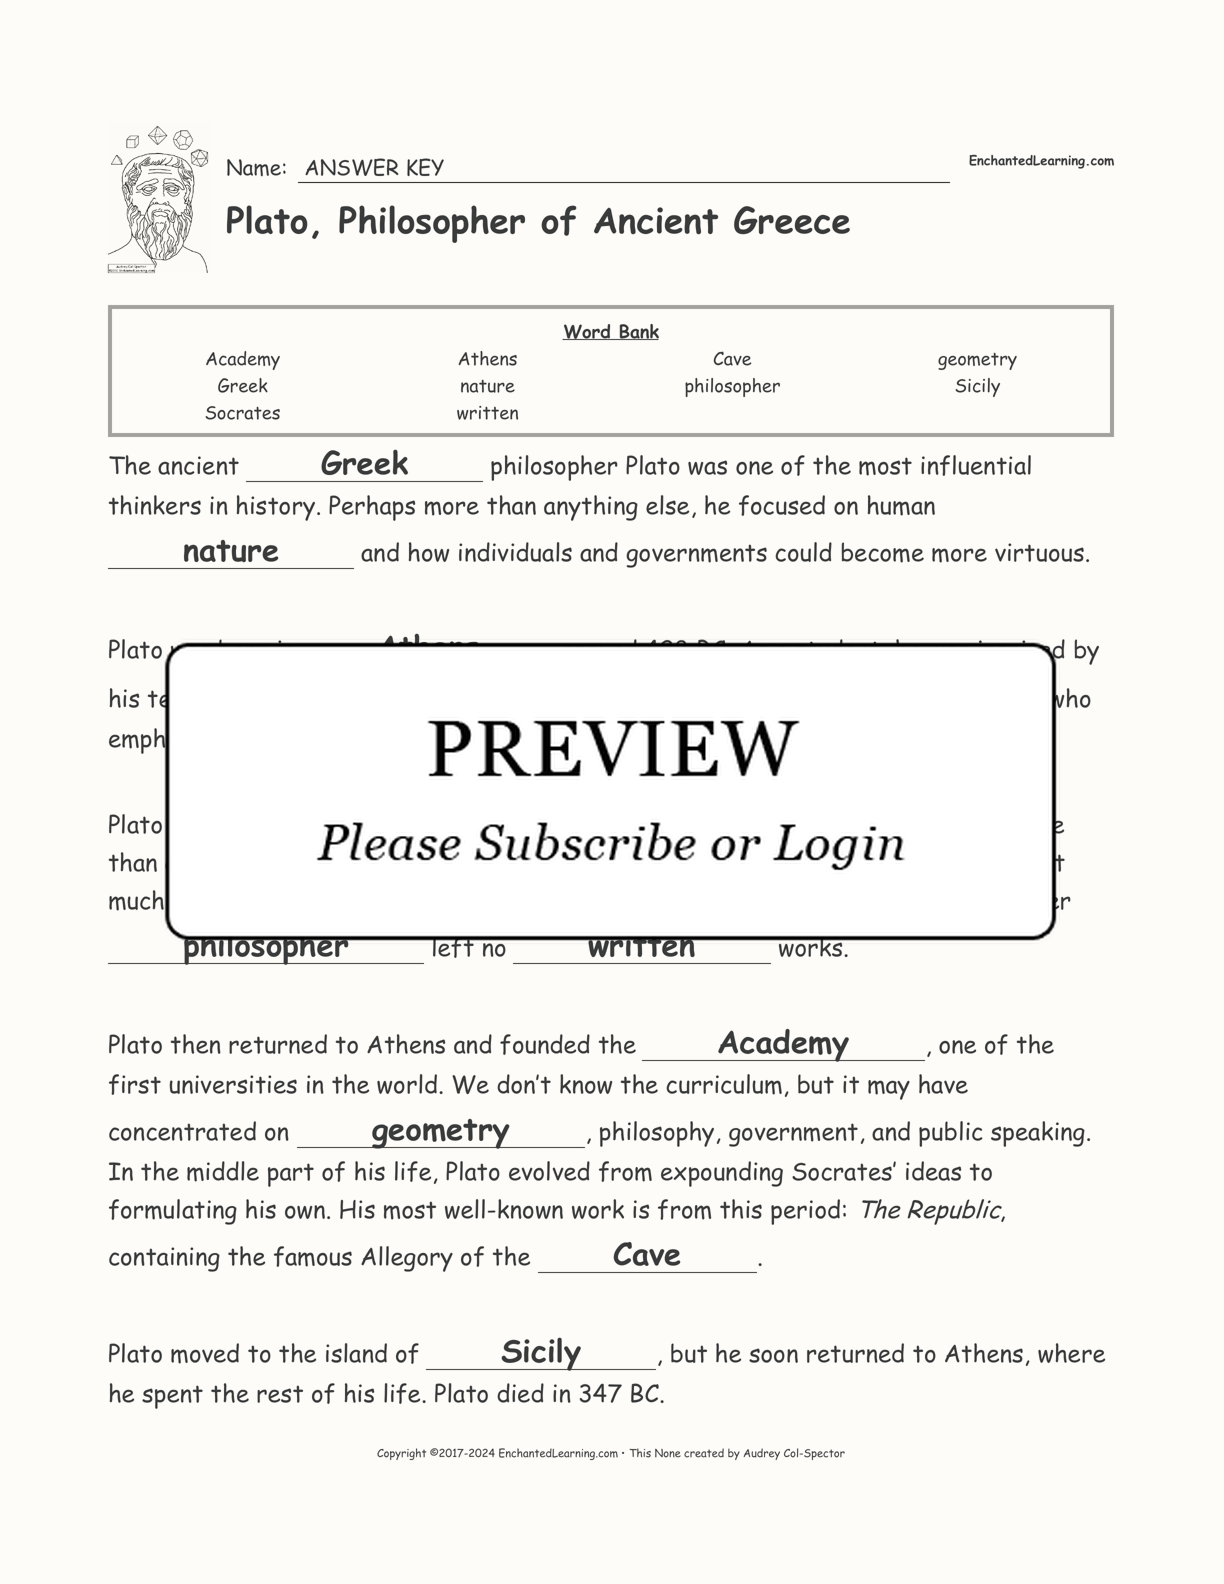 Plato, Philosopher of Ancient Greece interactive worksheet page 2